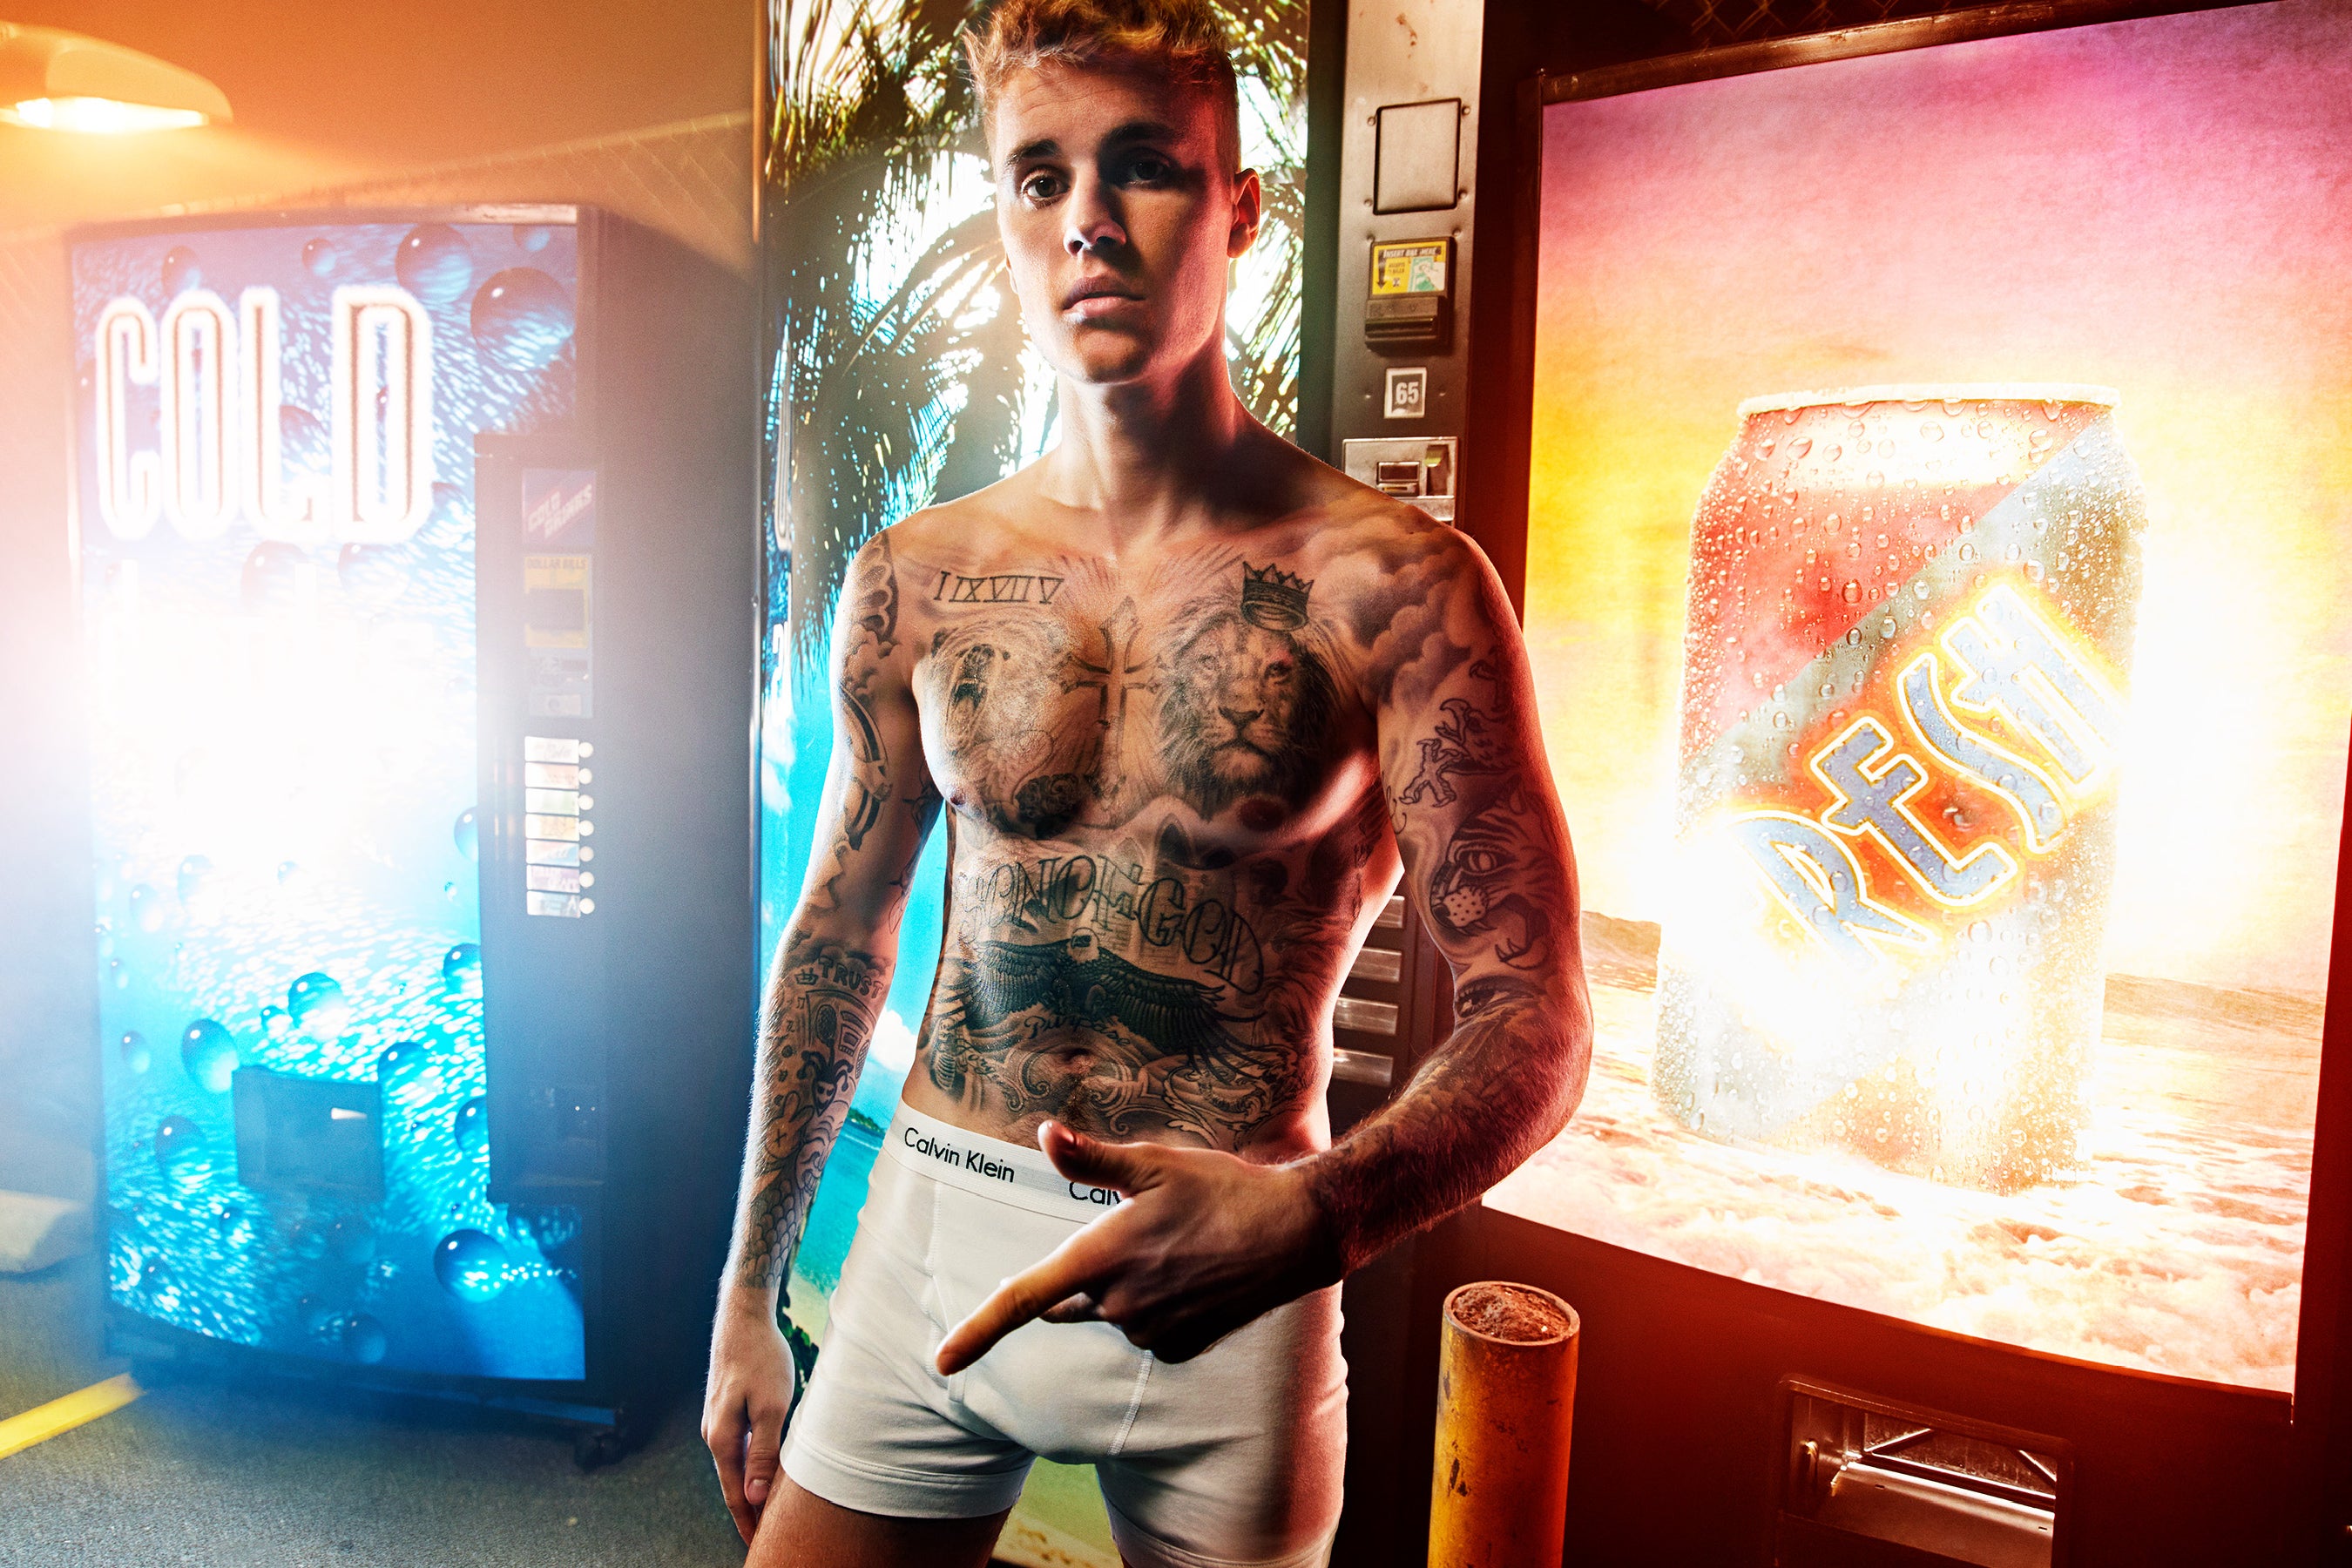 Justin Bieber Sits in His Underwear While Getting Tattoos Covered